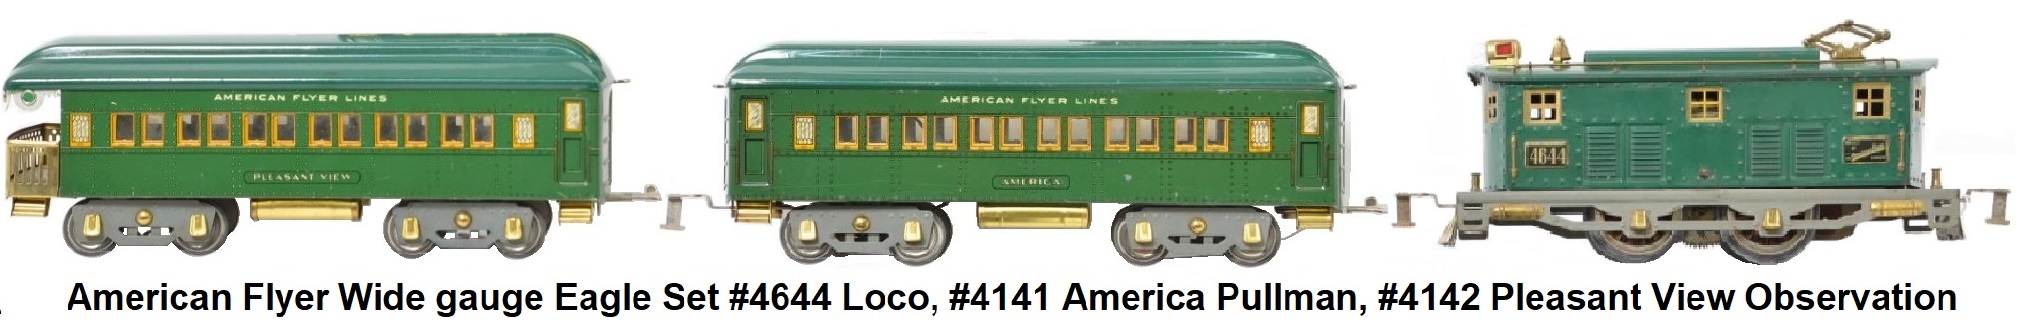 American Flyer Wide gauge #1472 Eagle Passenger Set with #4644 New Haven style electric outline loco, 14 inch #4141 America Pullman and #4142 Pleasant View Observation cars in 2-tone green circa 1930